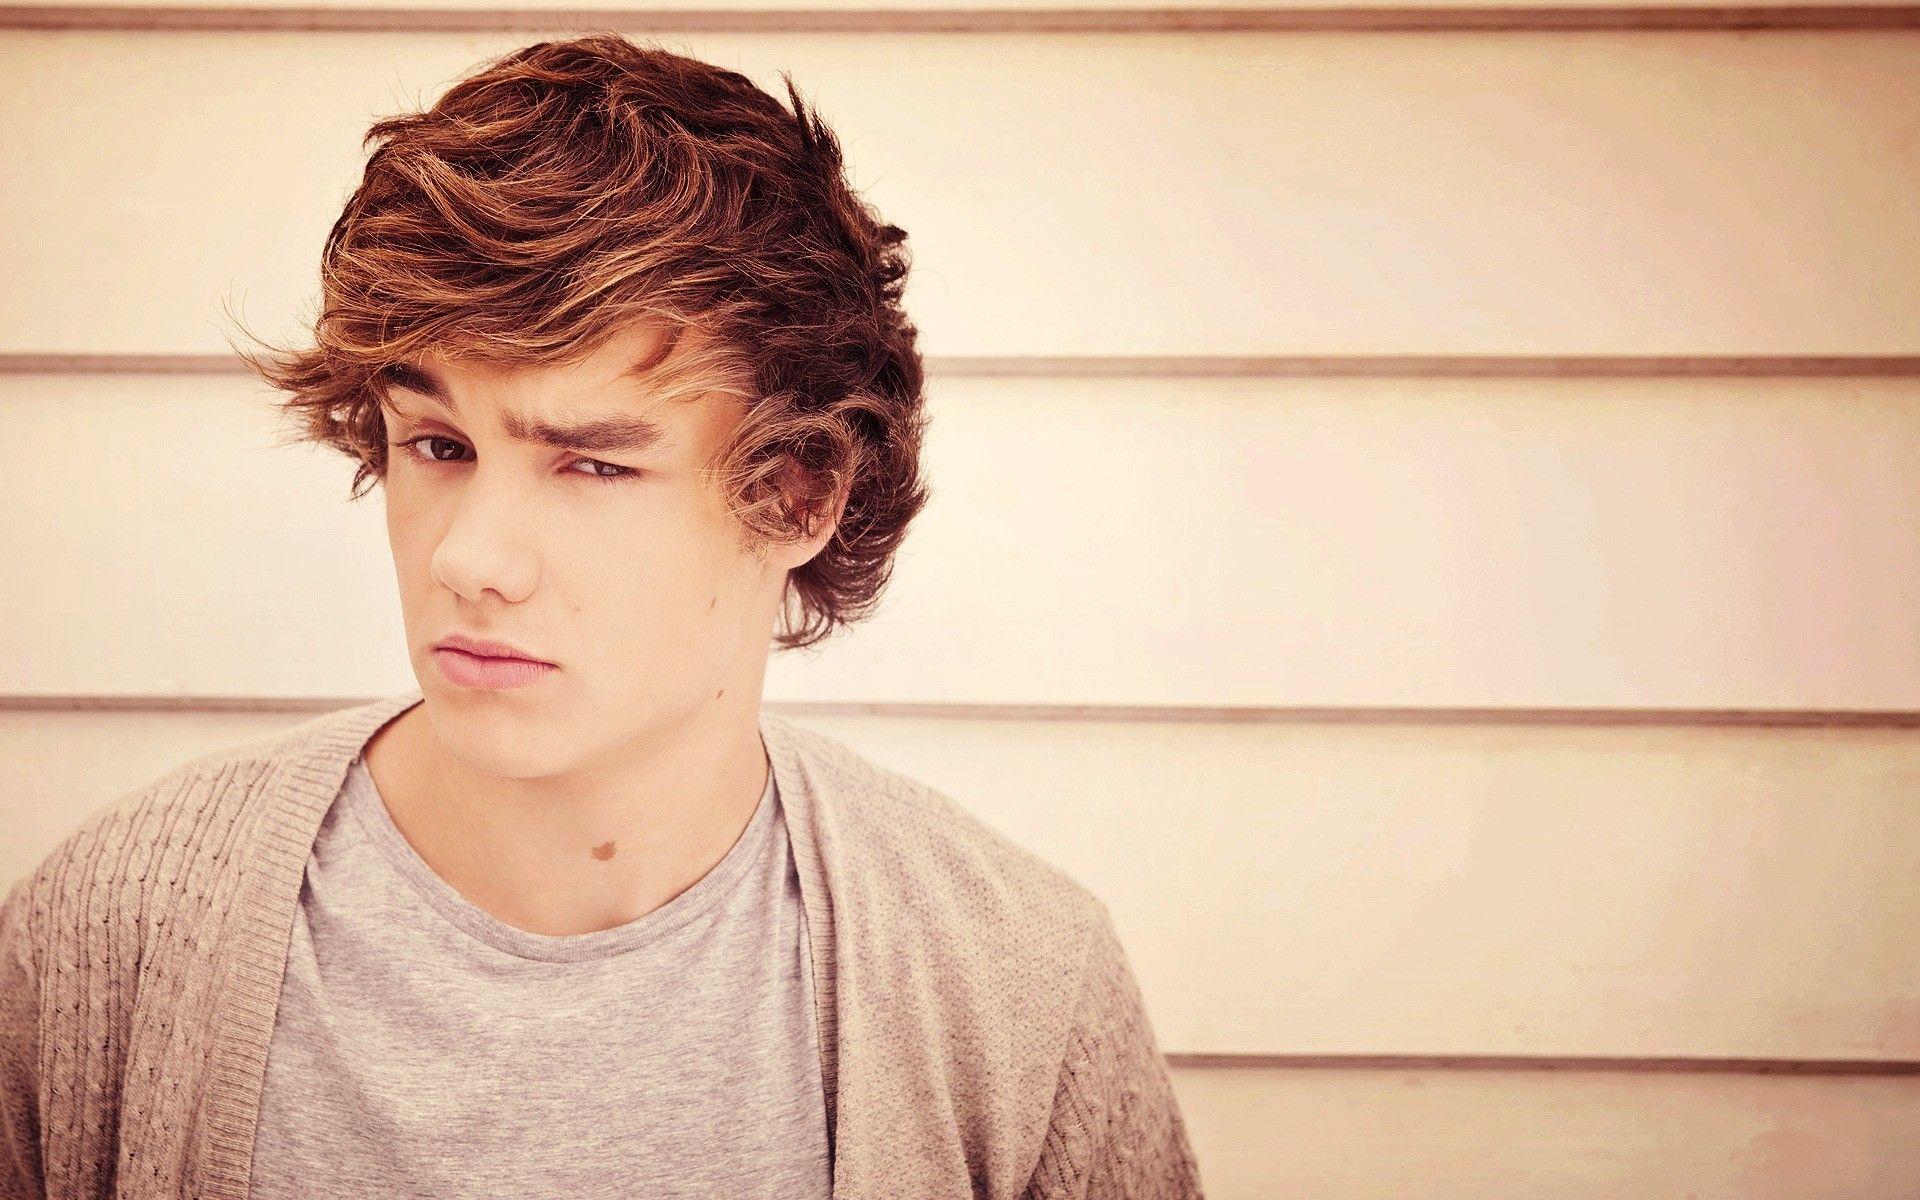 Liam Payne Look. Android wallpaper for free